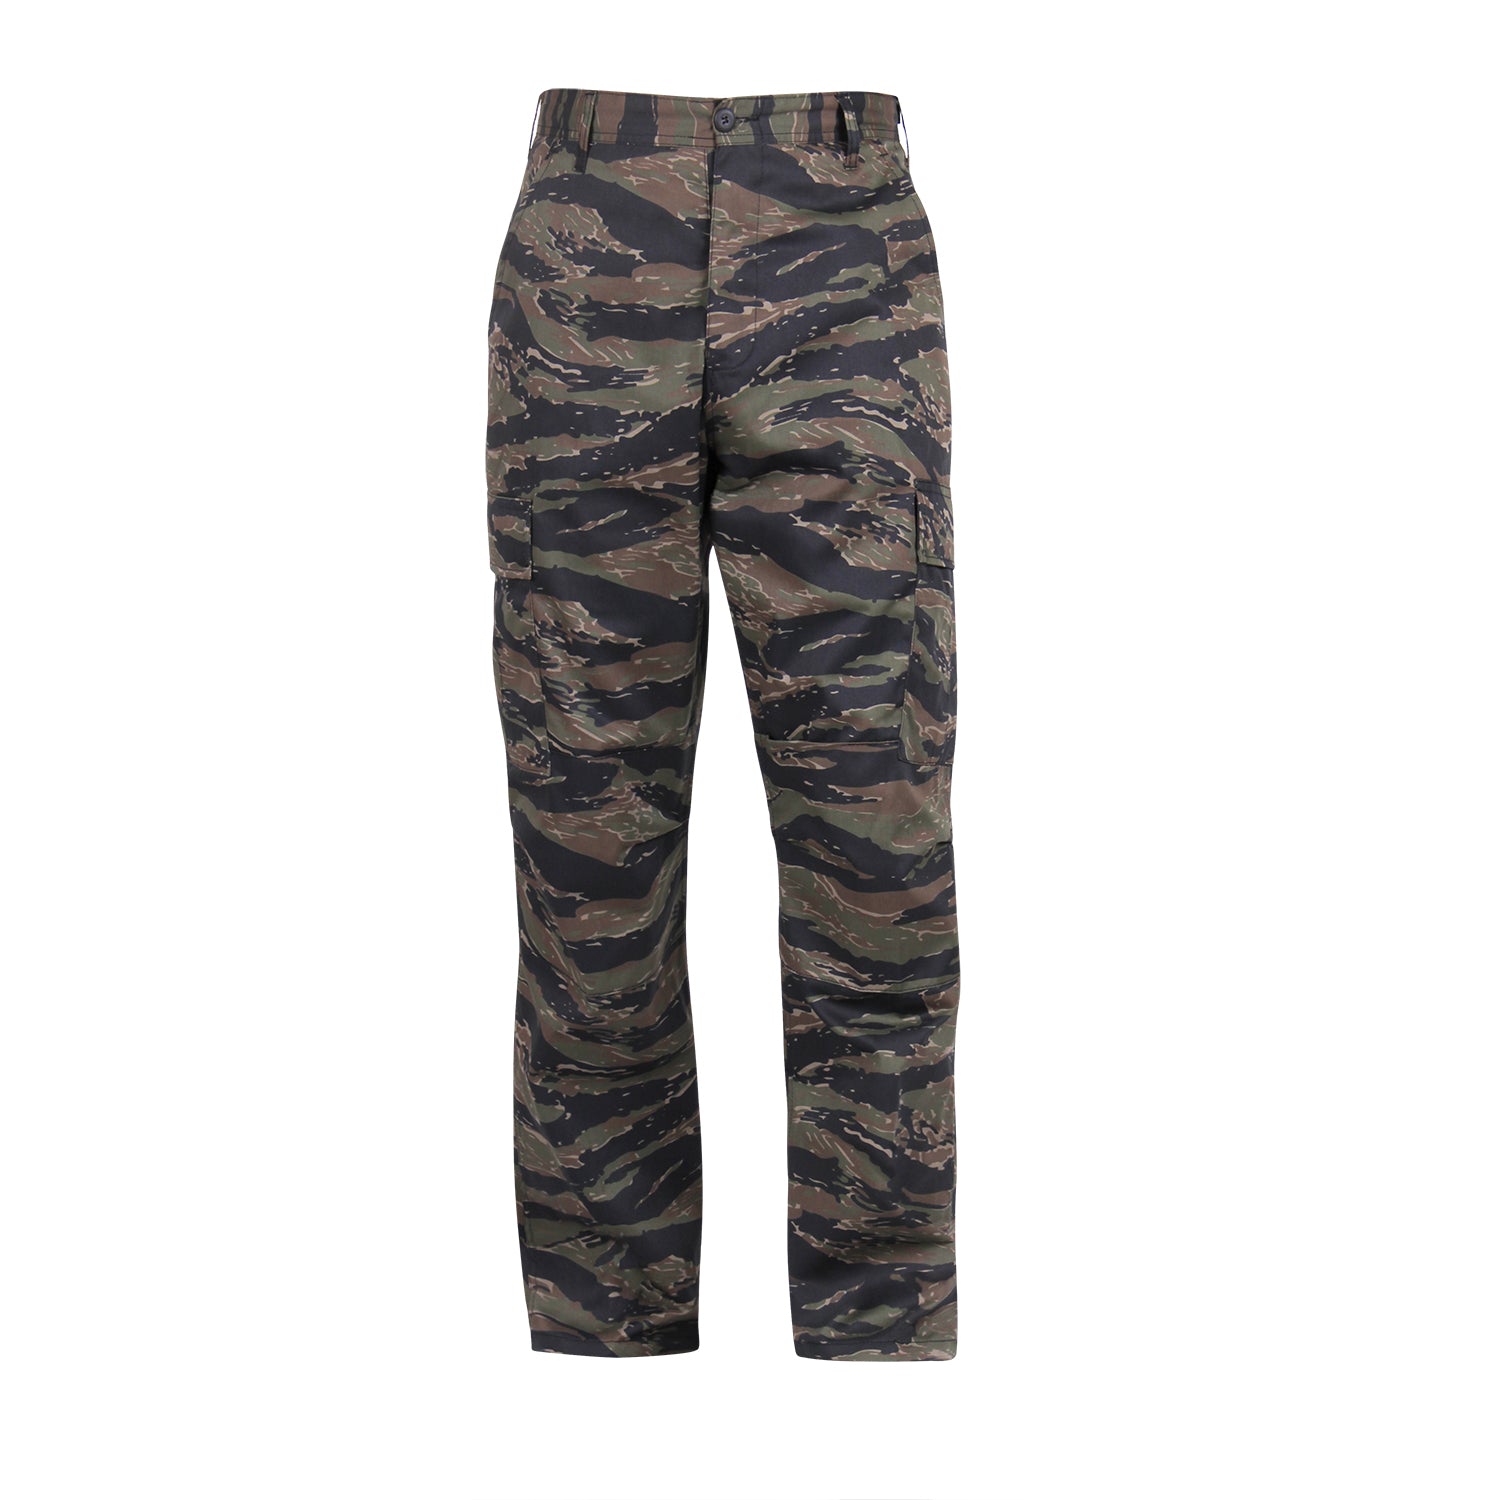 Camouflage Jogging Pants For Men And Women Fashionable Hiphop Mens Camo  Trousers With Army Green Beam Foot Design From Qiufen11, $30.44 | DHgate.Com